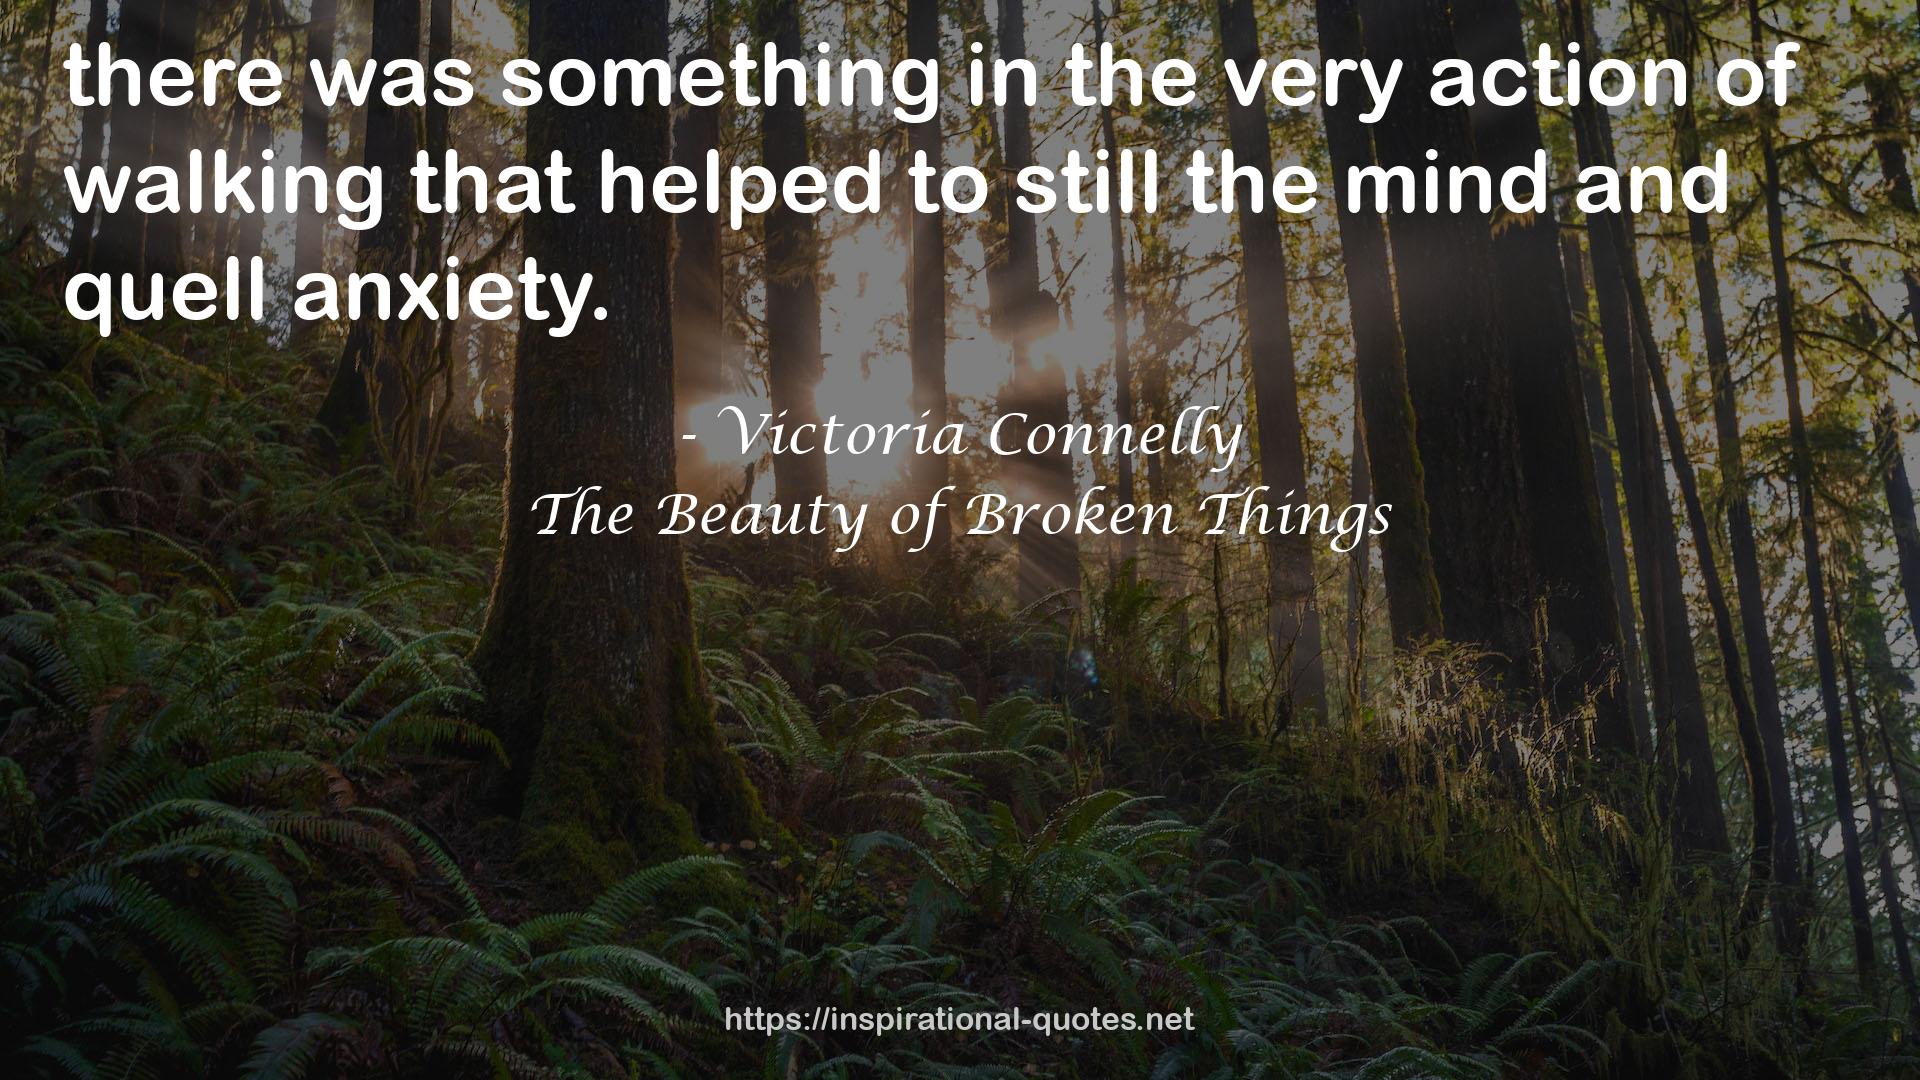 Victoria Connelly QUOTES